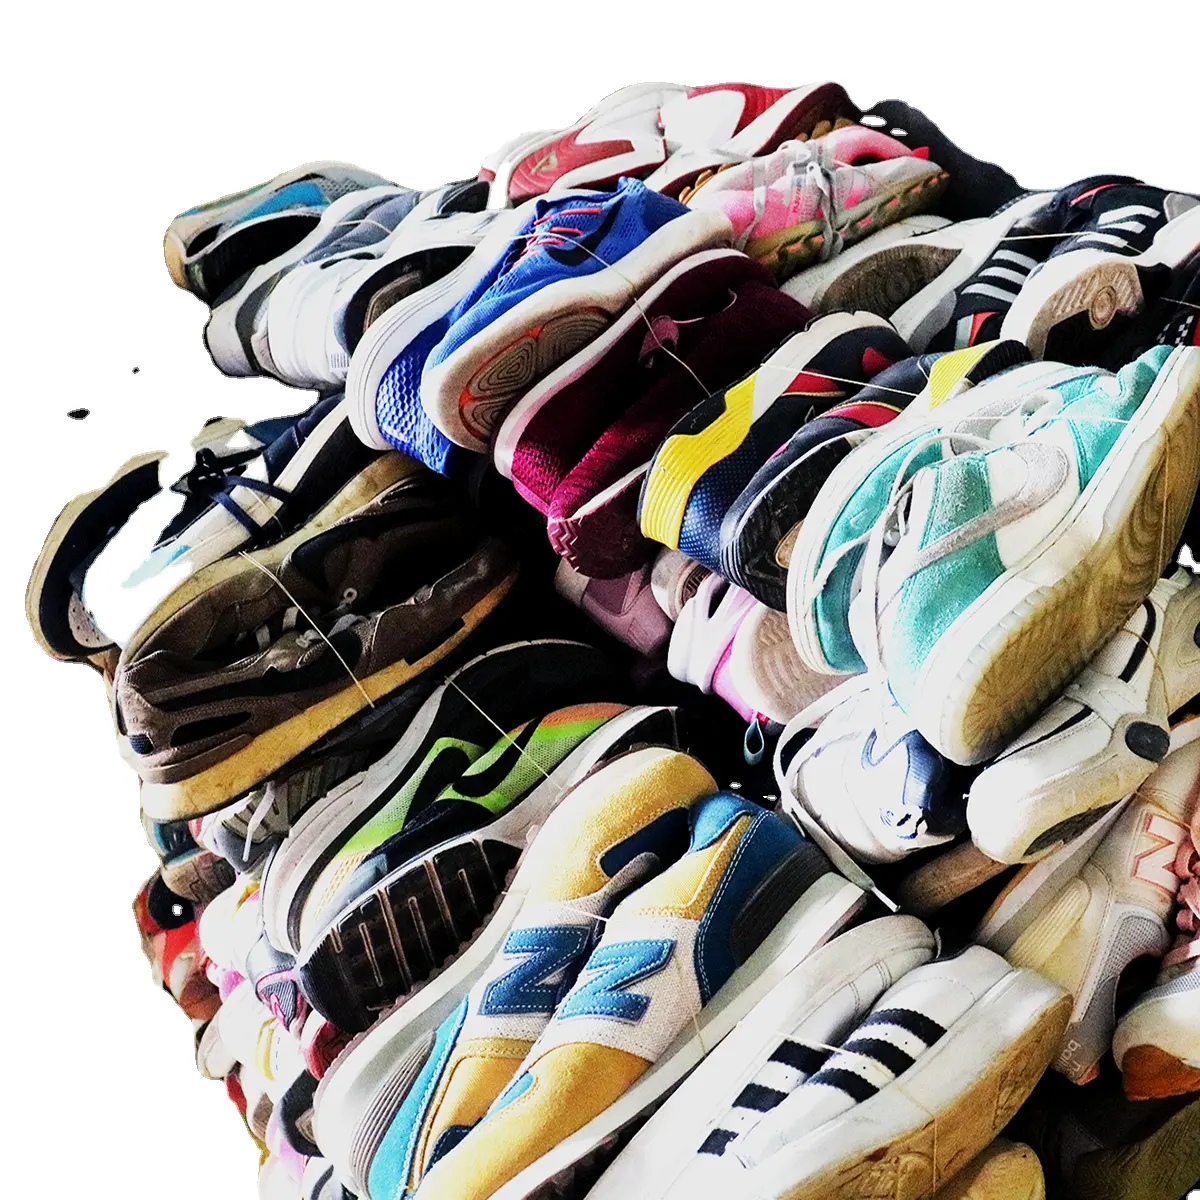 shoes stock used shoes sneaker Mixed style cheap made in china shoes secondhand running